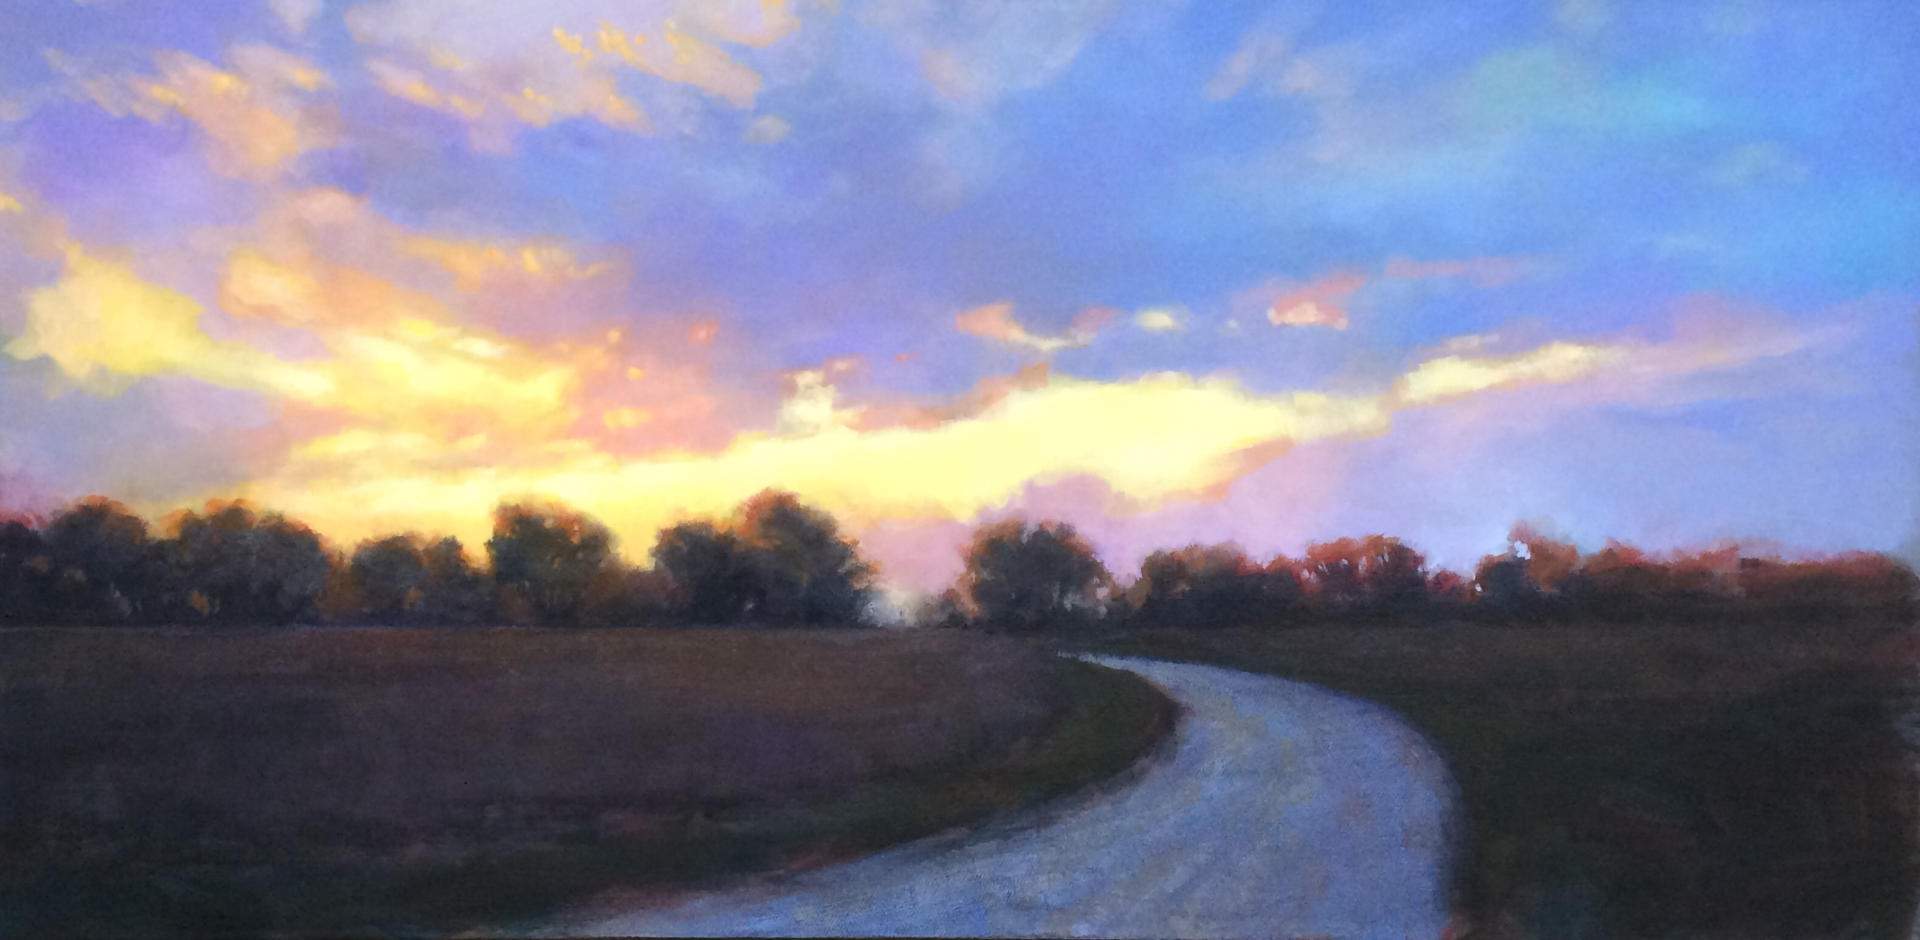 acrylic painting of a road on a plain grassland